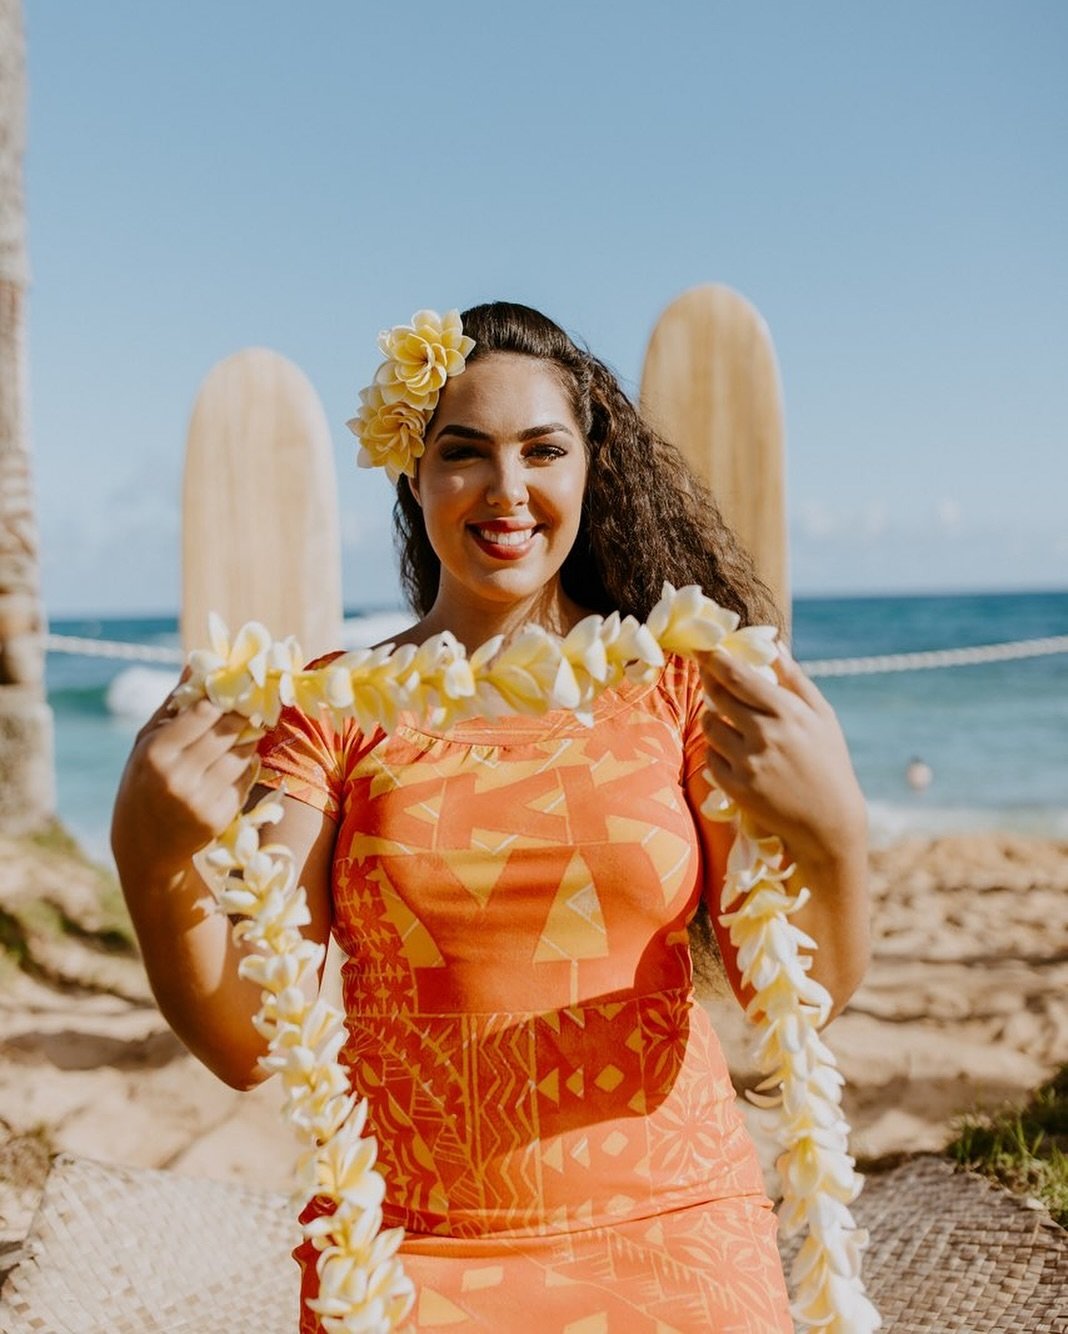 🌺MAY DAY IS LEI DAY IN HAWAI&rsquo;I NEI🌺

Today we celebrate the custom of giving and receiving a lei in Hawai&rsquo;i. A lei is a common symbol of love, friendship, celebration or greeting. 
In essence, it is a symbol of ALOHA!

Celebrate May Day